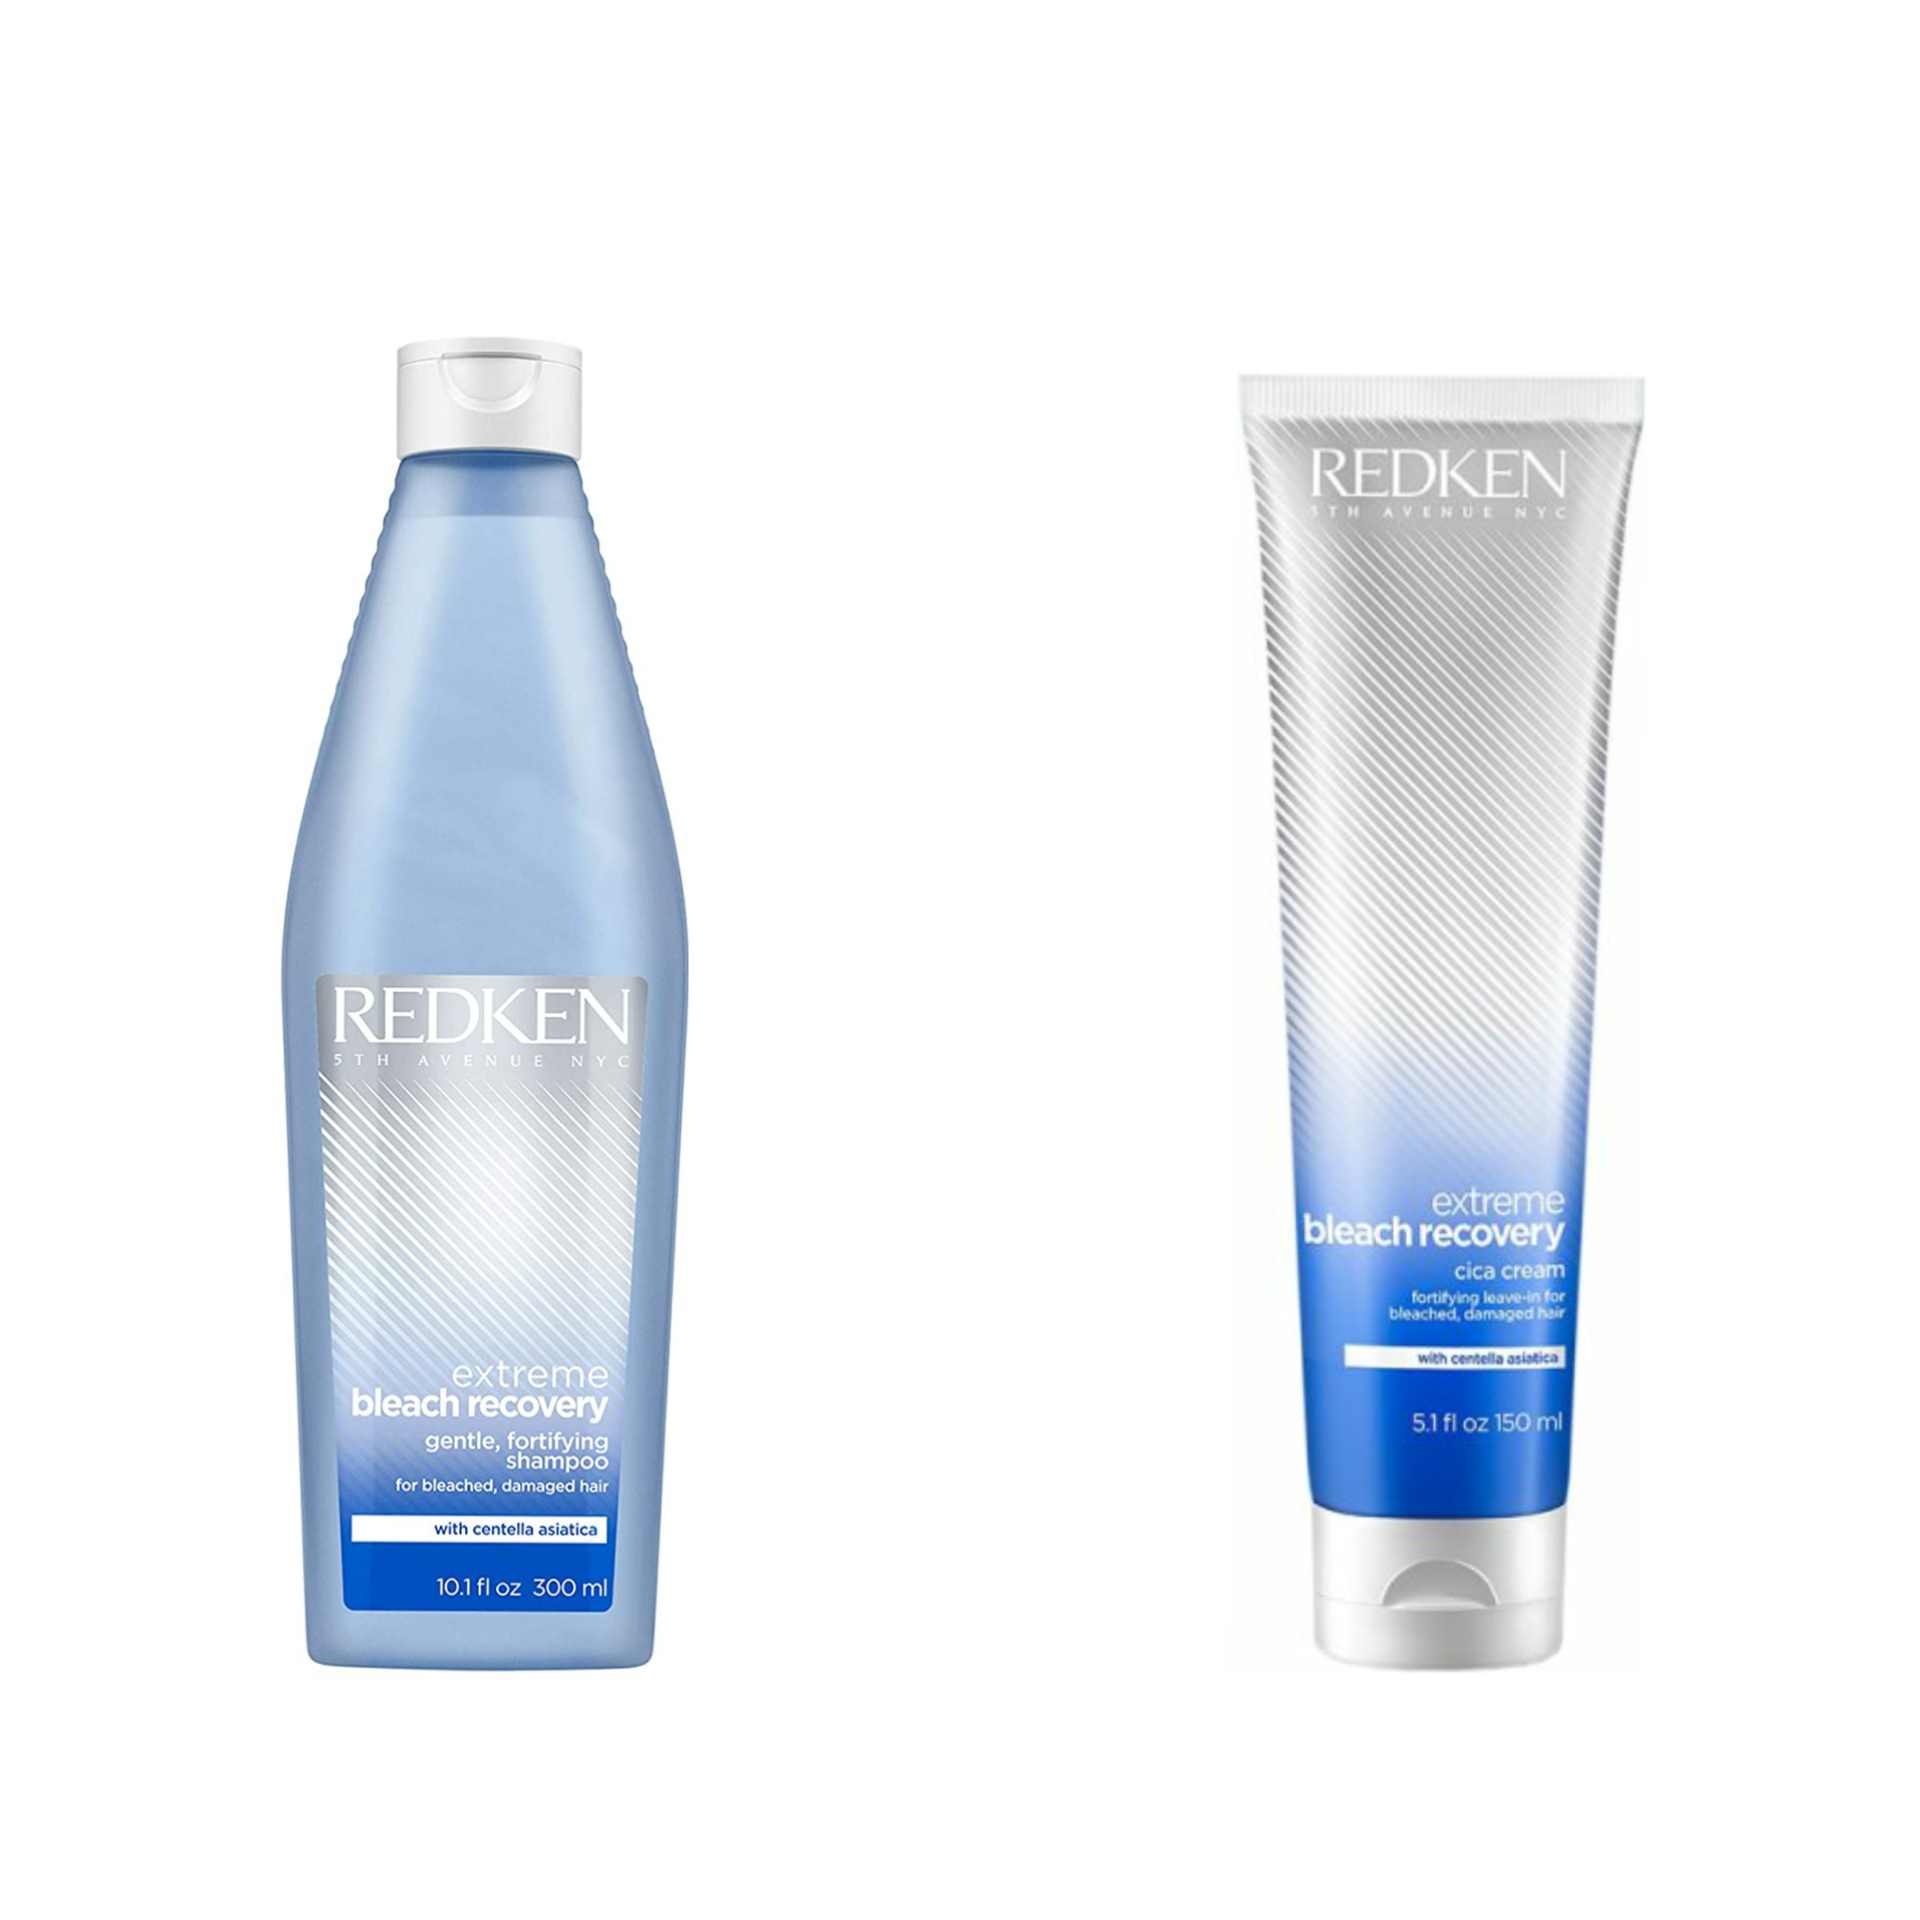 Redken Extreme Bleach Recovery 1x Gentle Fortifying Shampoo 300ml - 1x Cica Cream 150ml